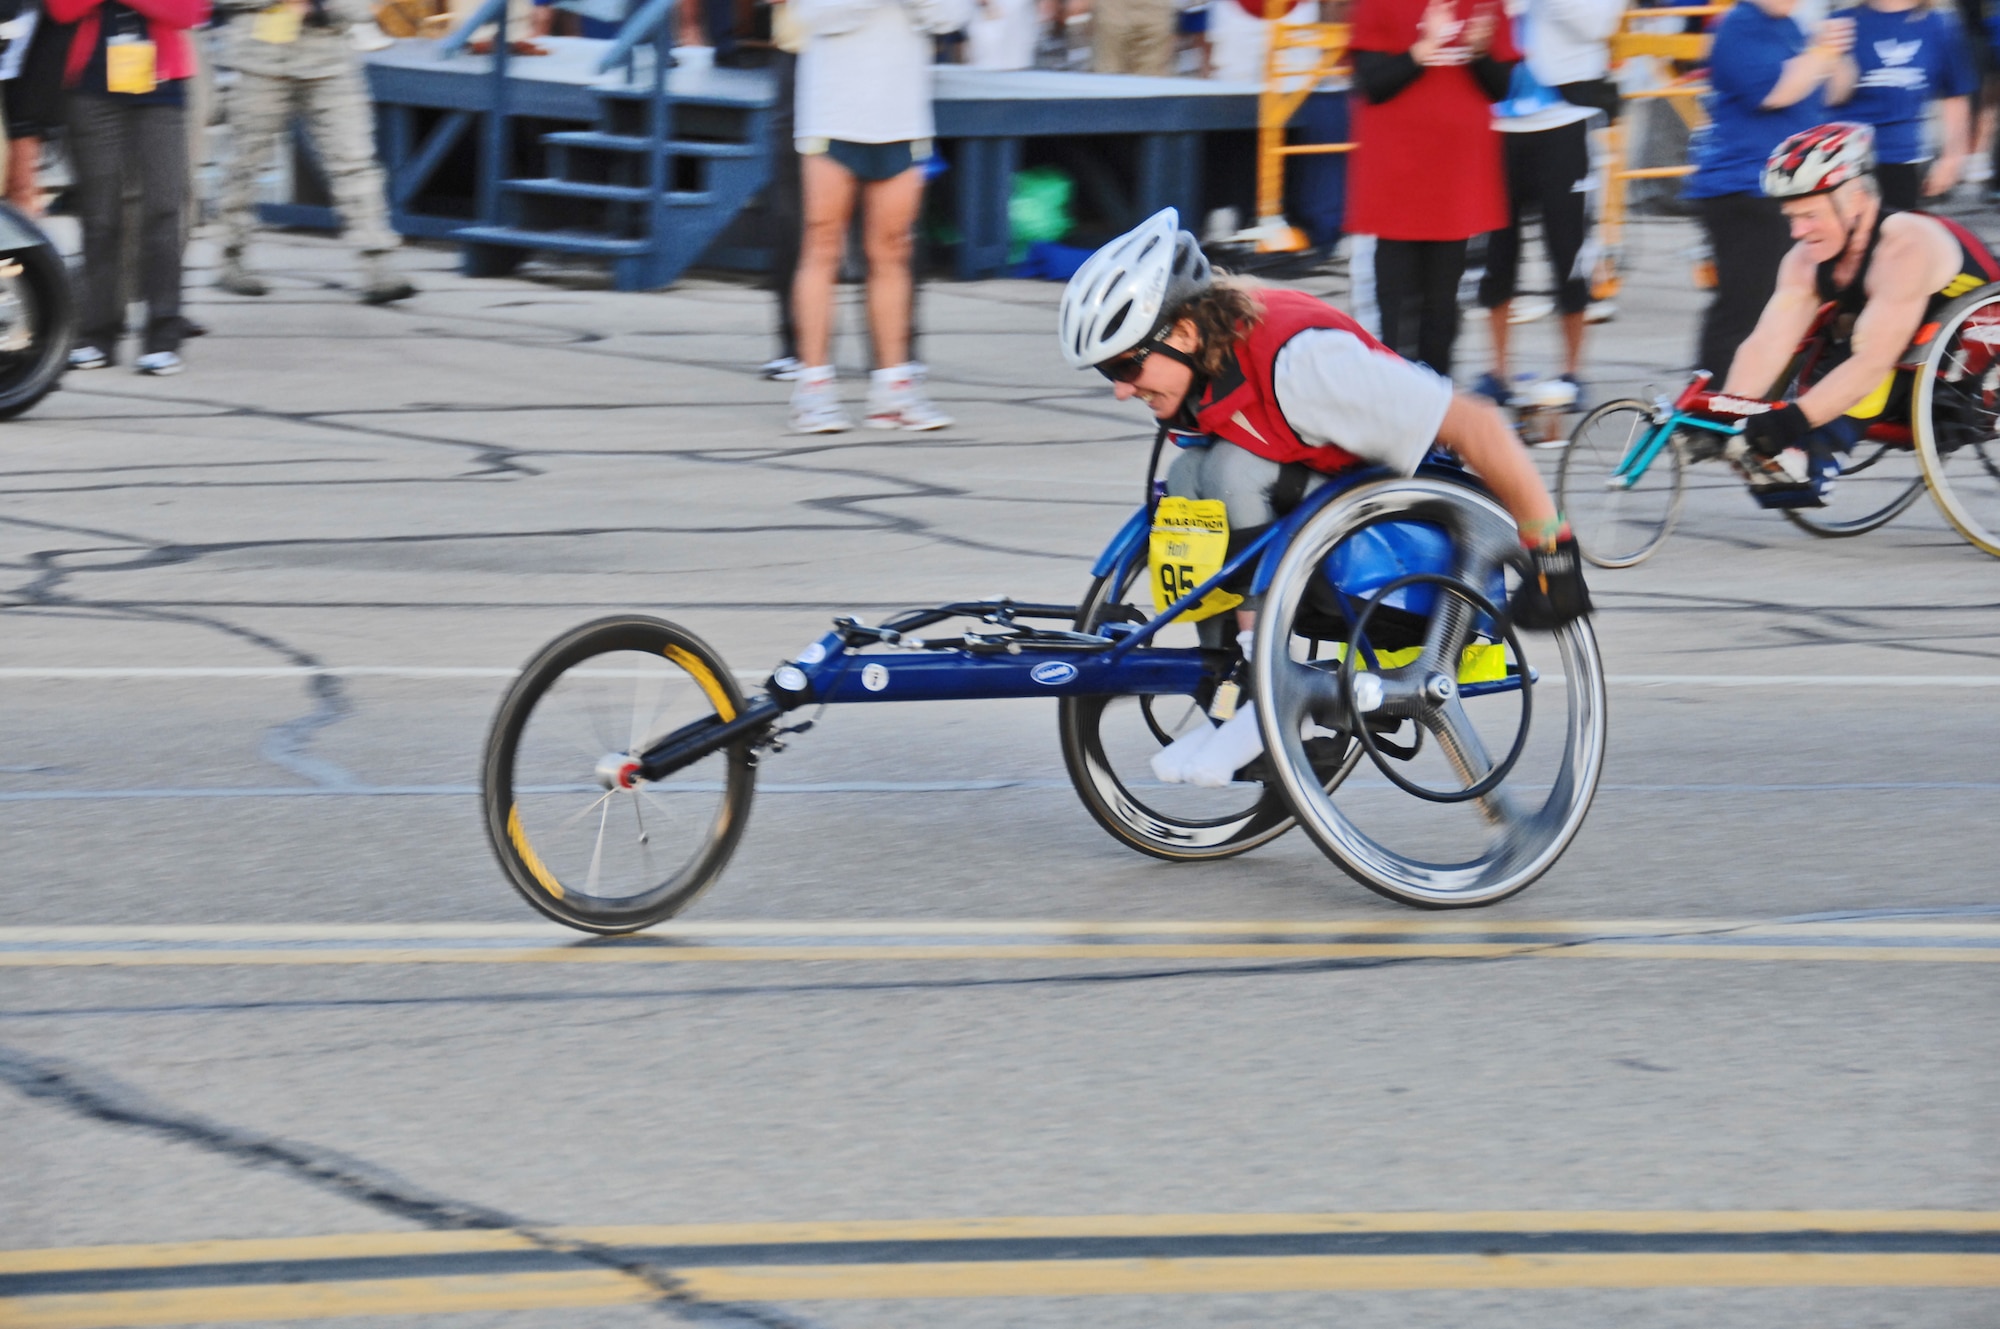 Wheel racer Holly Koester of Cleveland accelerates to her pace during the 13th Annual U.S. Air Force Marathon Sept. 19, 2009 at Wright-Patterson Air Force Base, Ohio.  Ms. Koester, who was paralyzed below the waist from a 1990 accident, has participated in all but one of the Air Force Marathons held to date.  (Air Force photo/Ben Strasser)